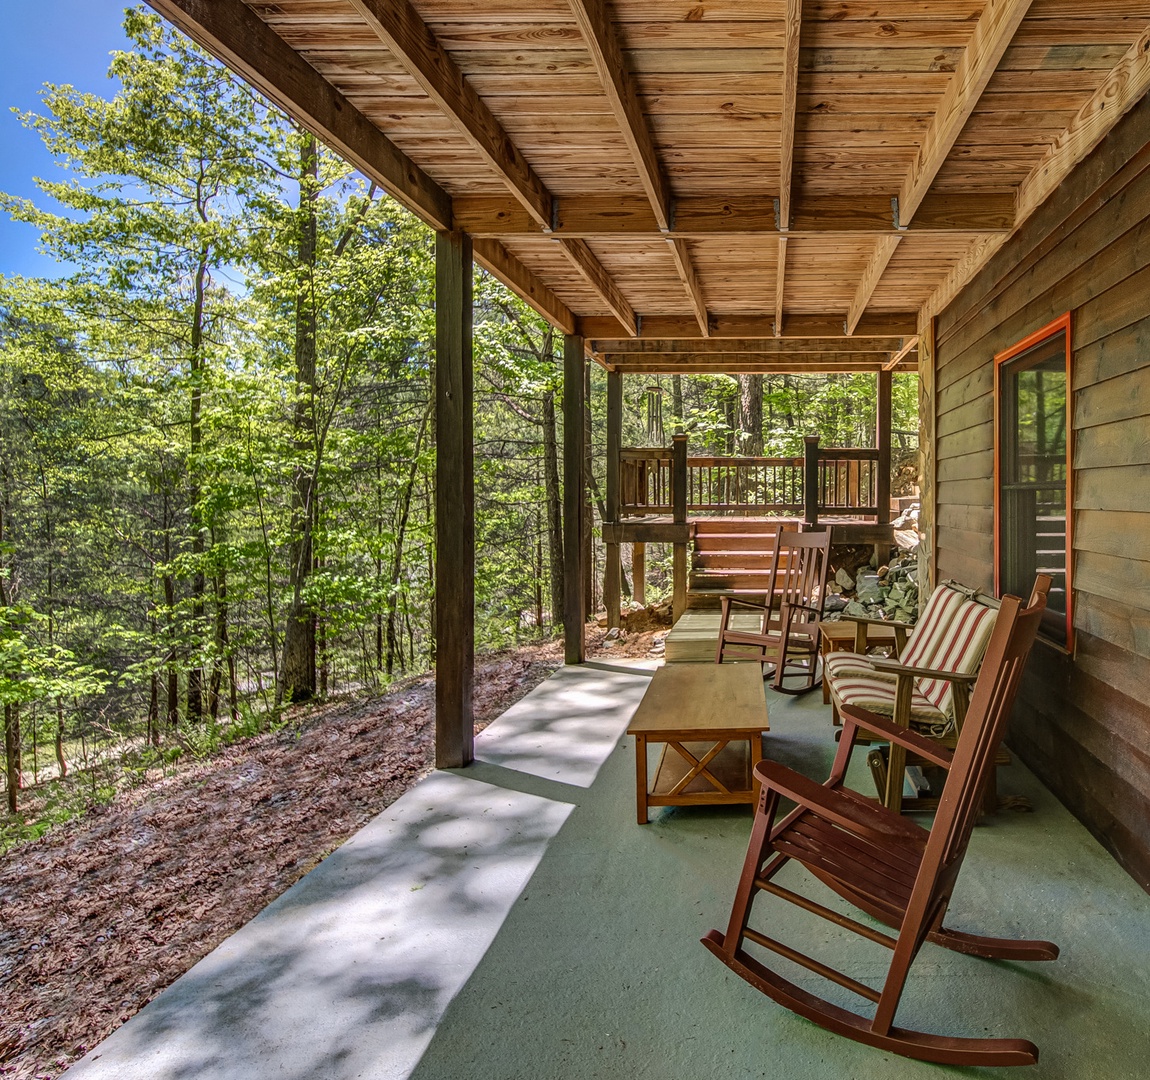 You will enjoy evenings together on the covered porch next to the hot tub